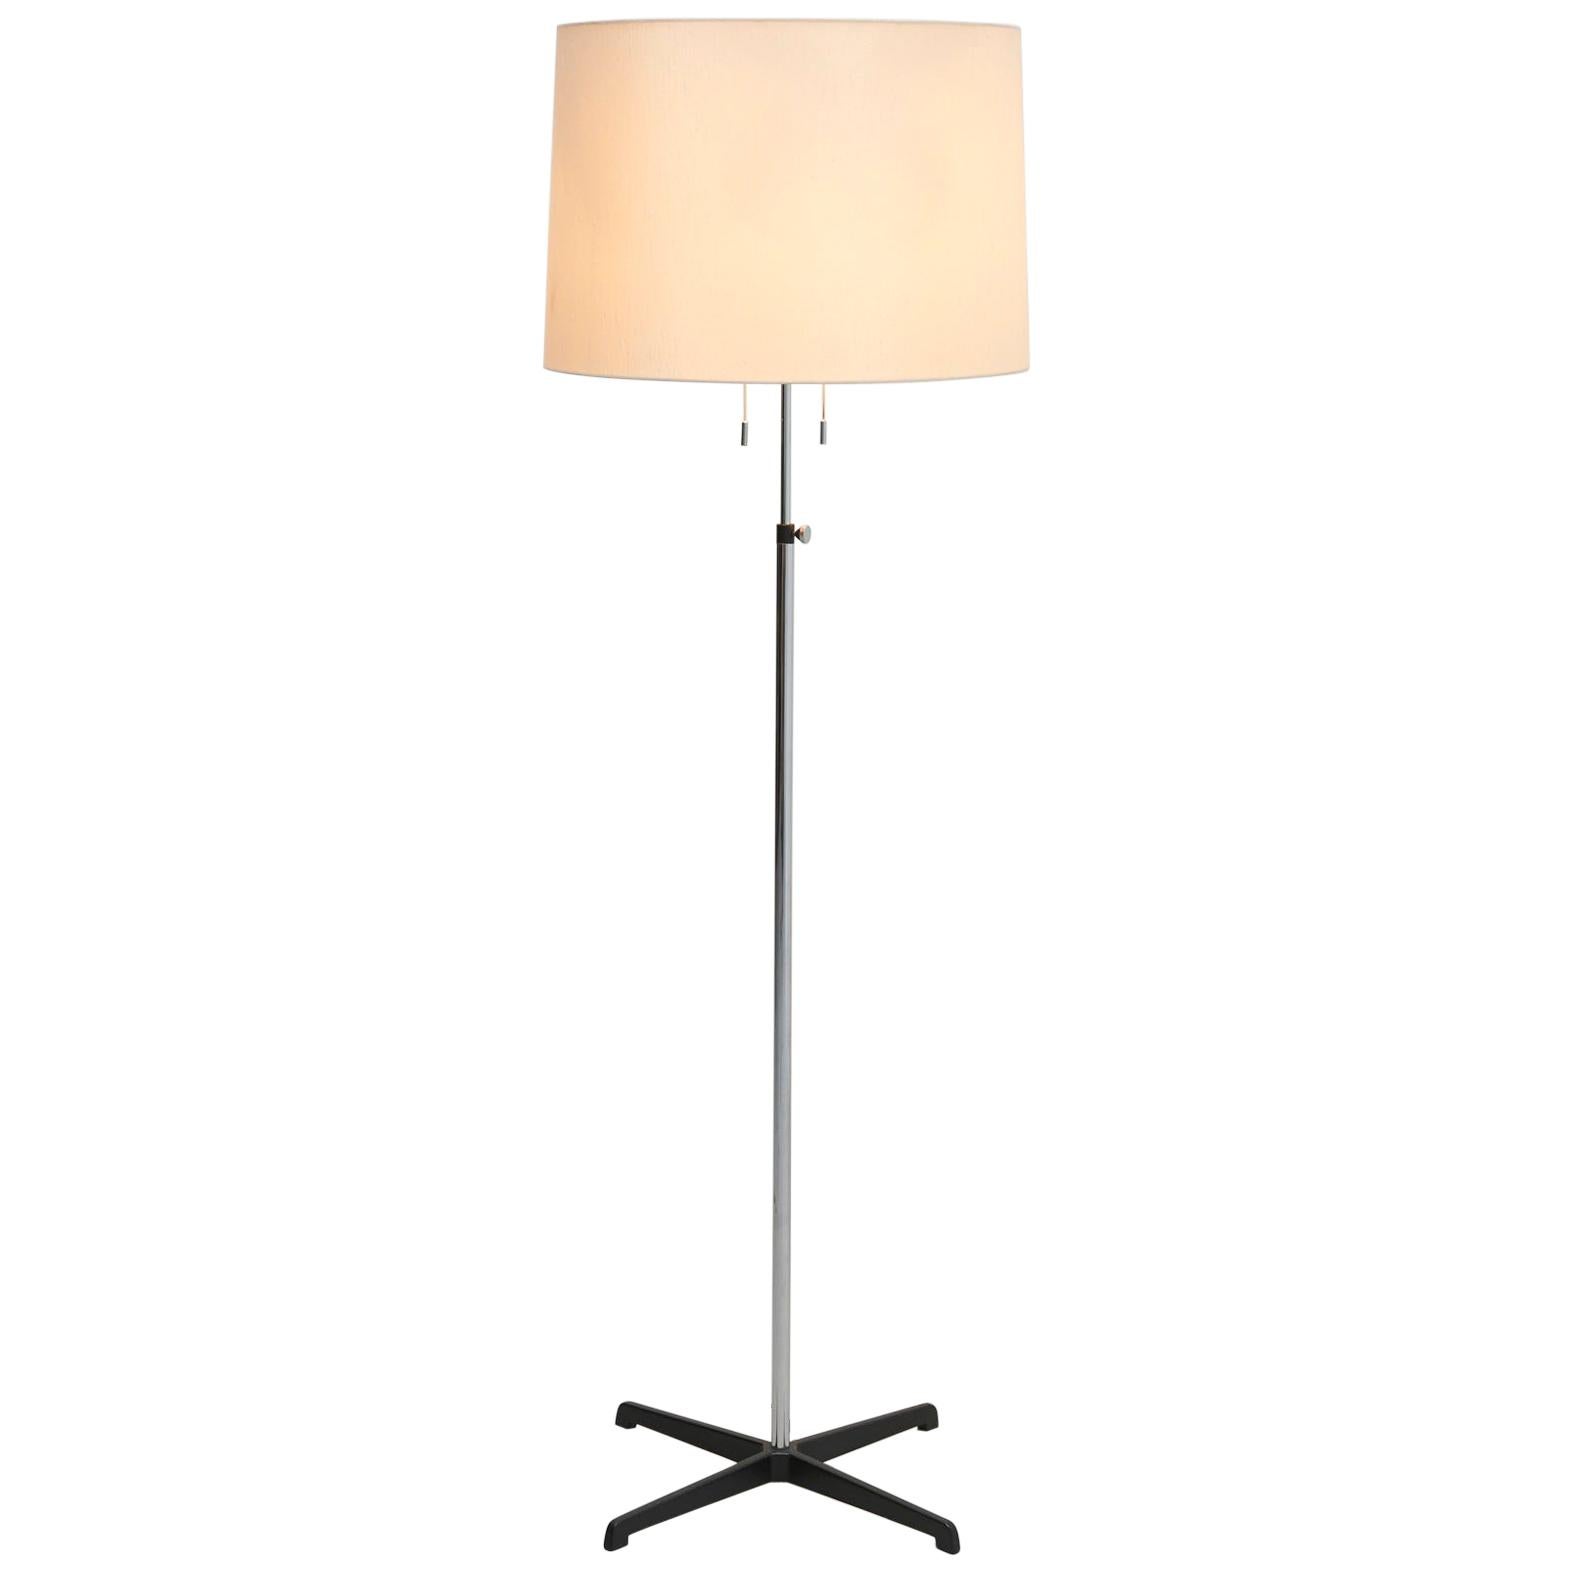 Floor Lamp with Cross Foot For Sale